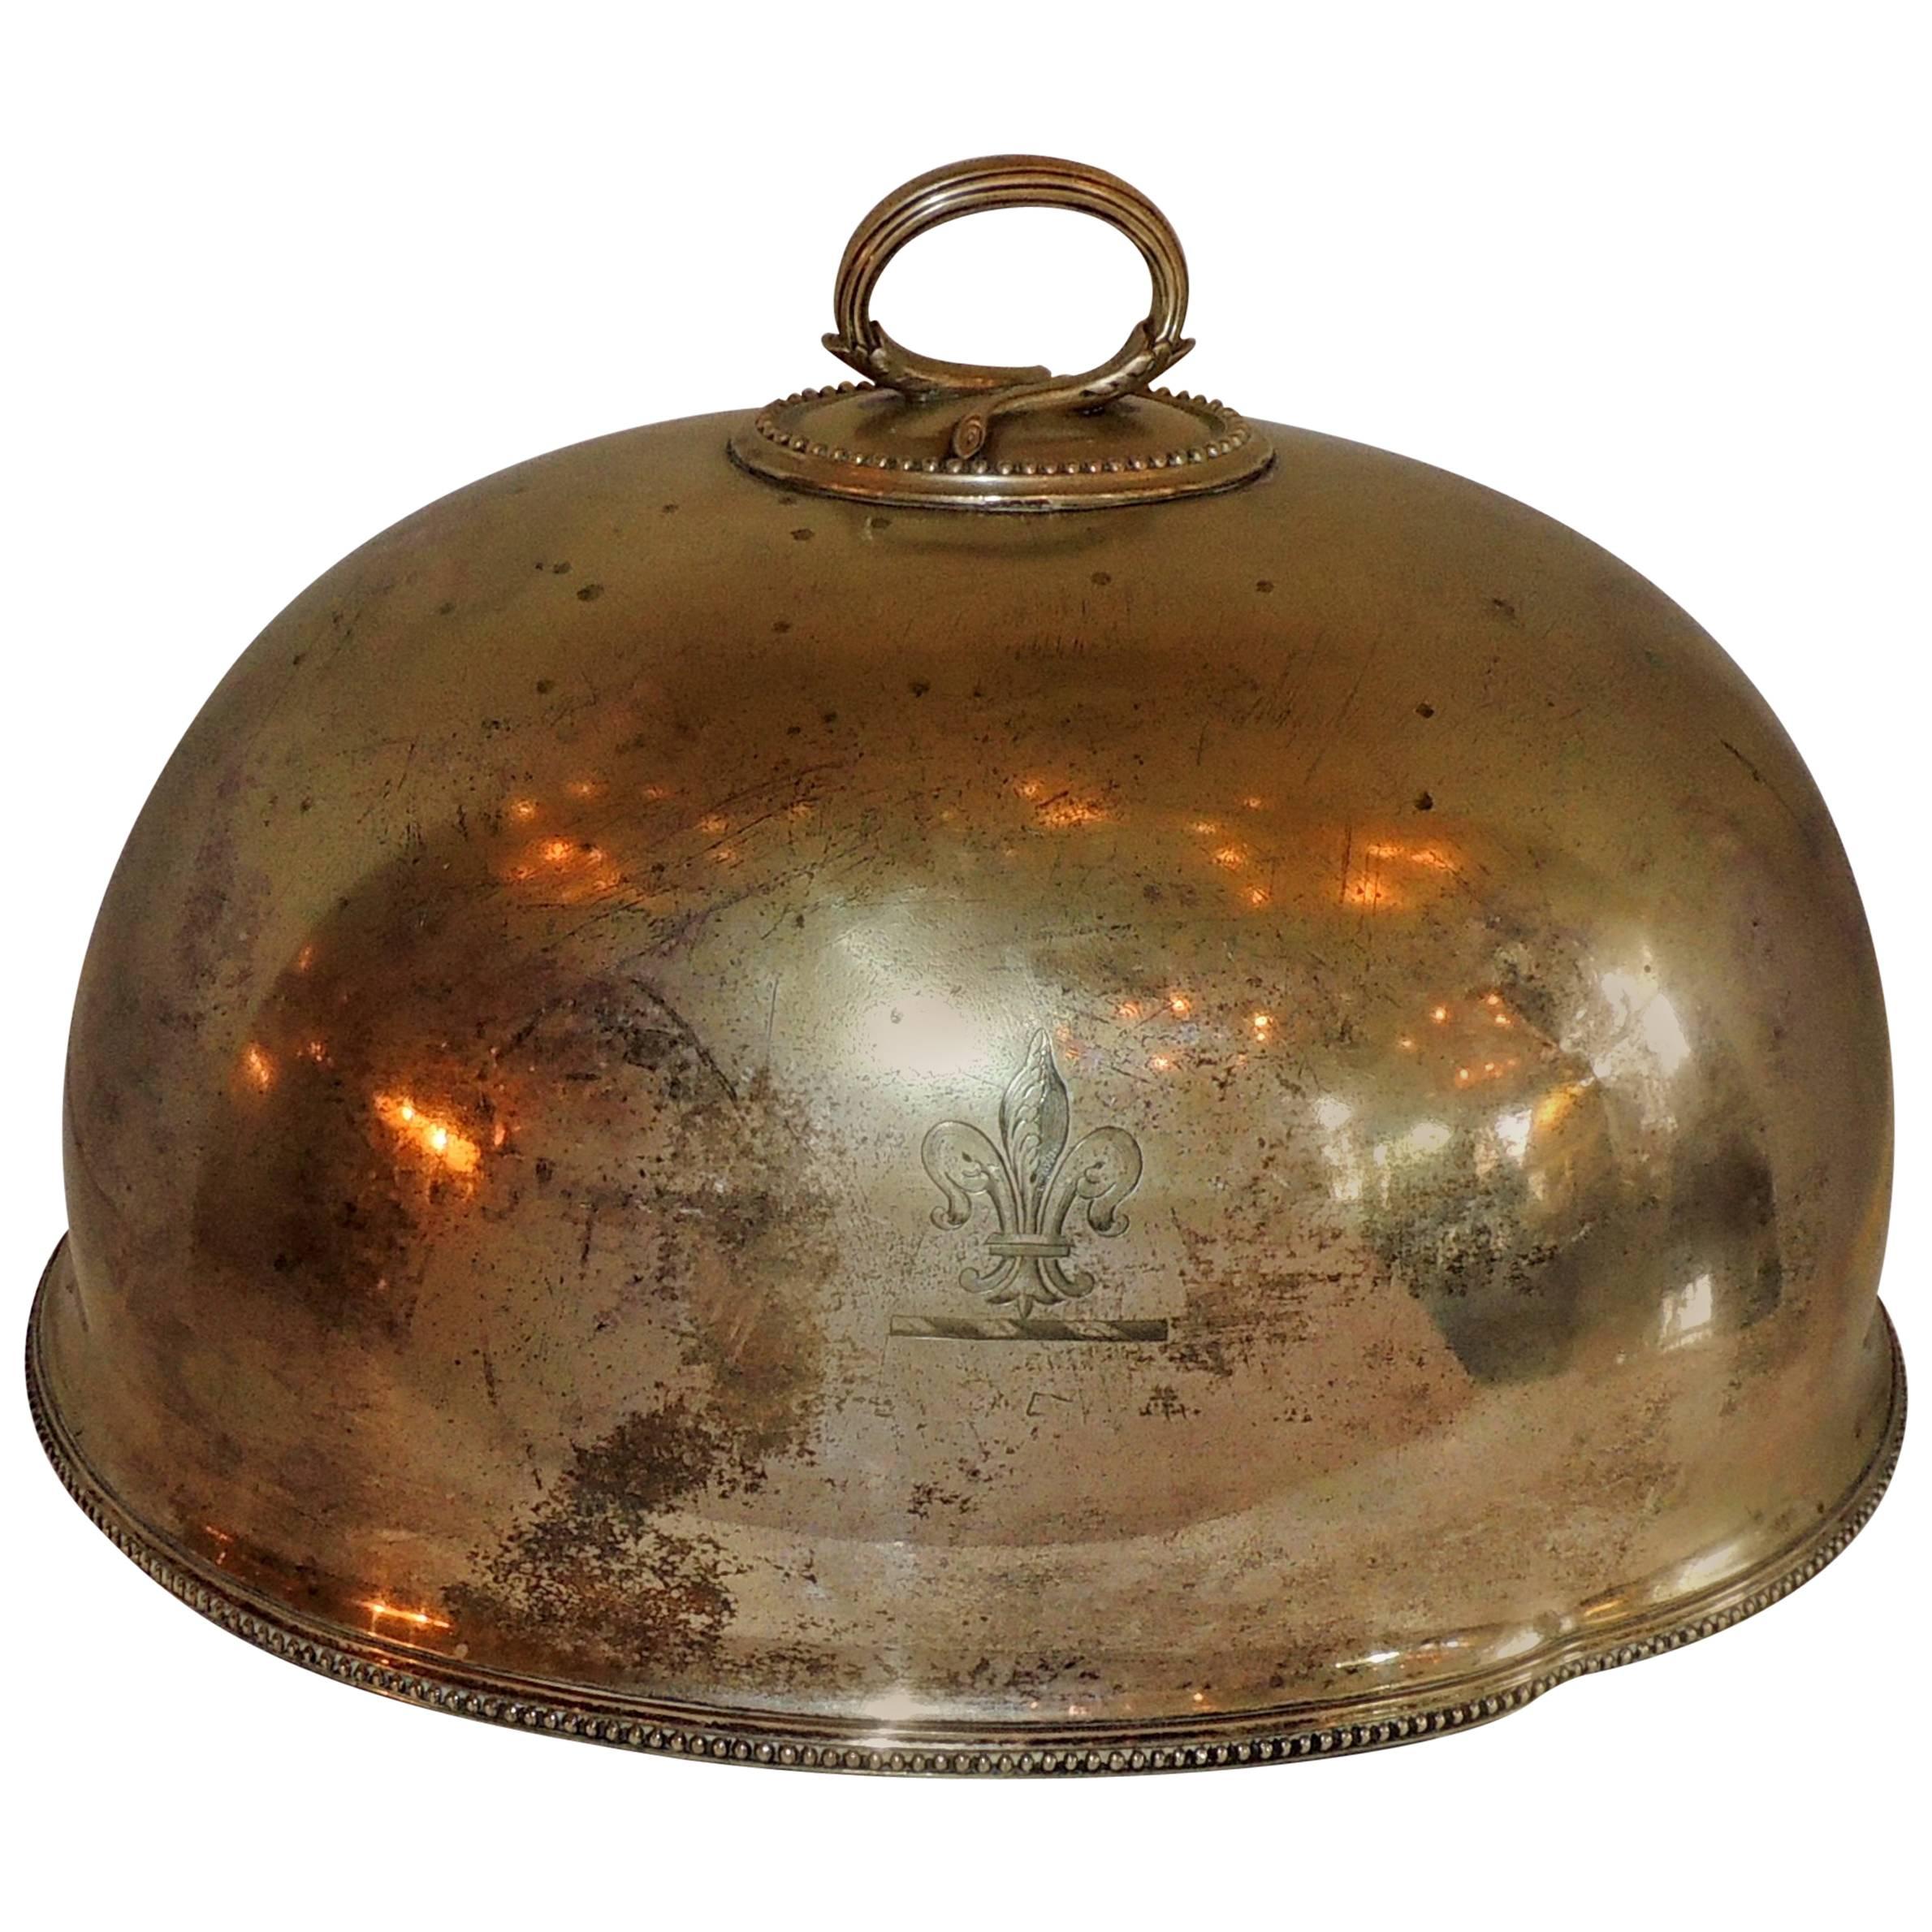 Antique A Silver Plated Meat Food Turkey Dome Cover Victorian Cloche Large